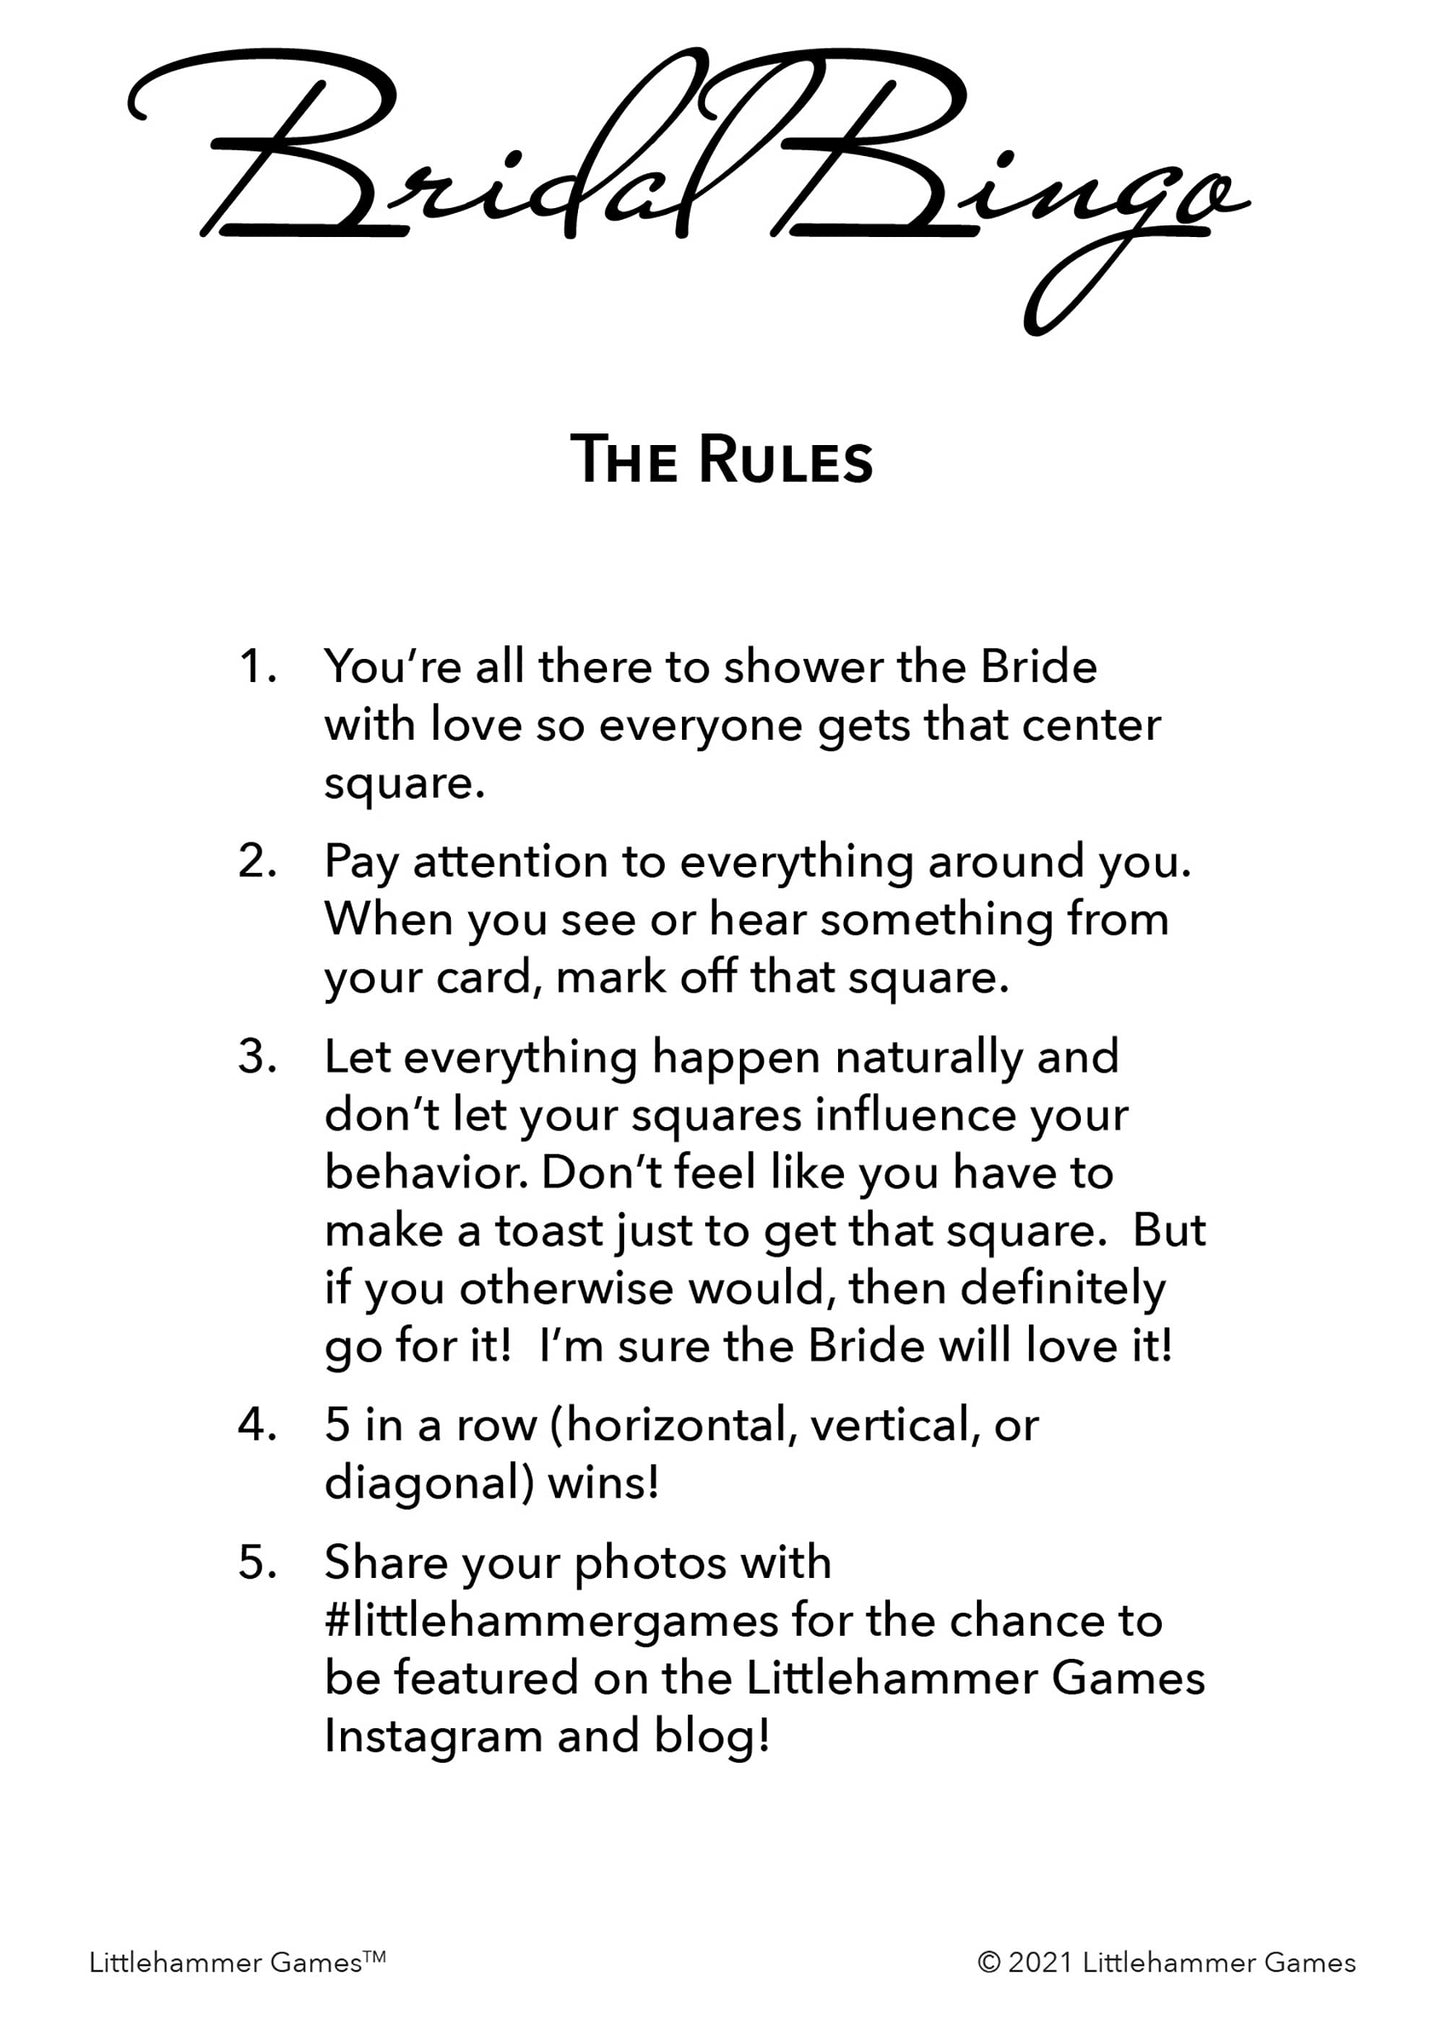 Bridal Bingo rules card with black text on a white background